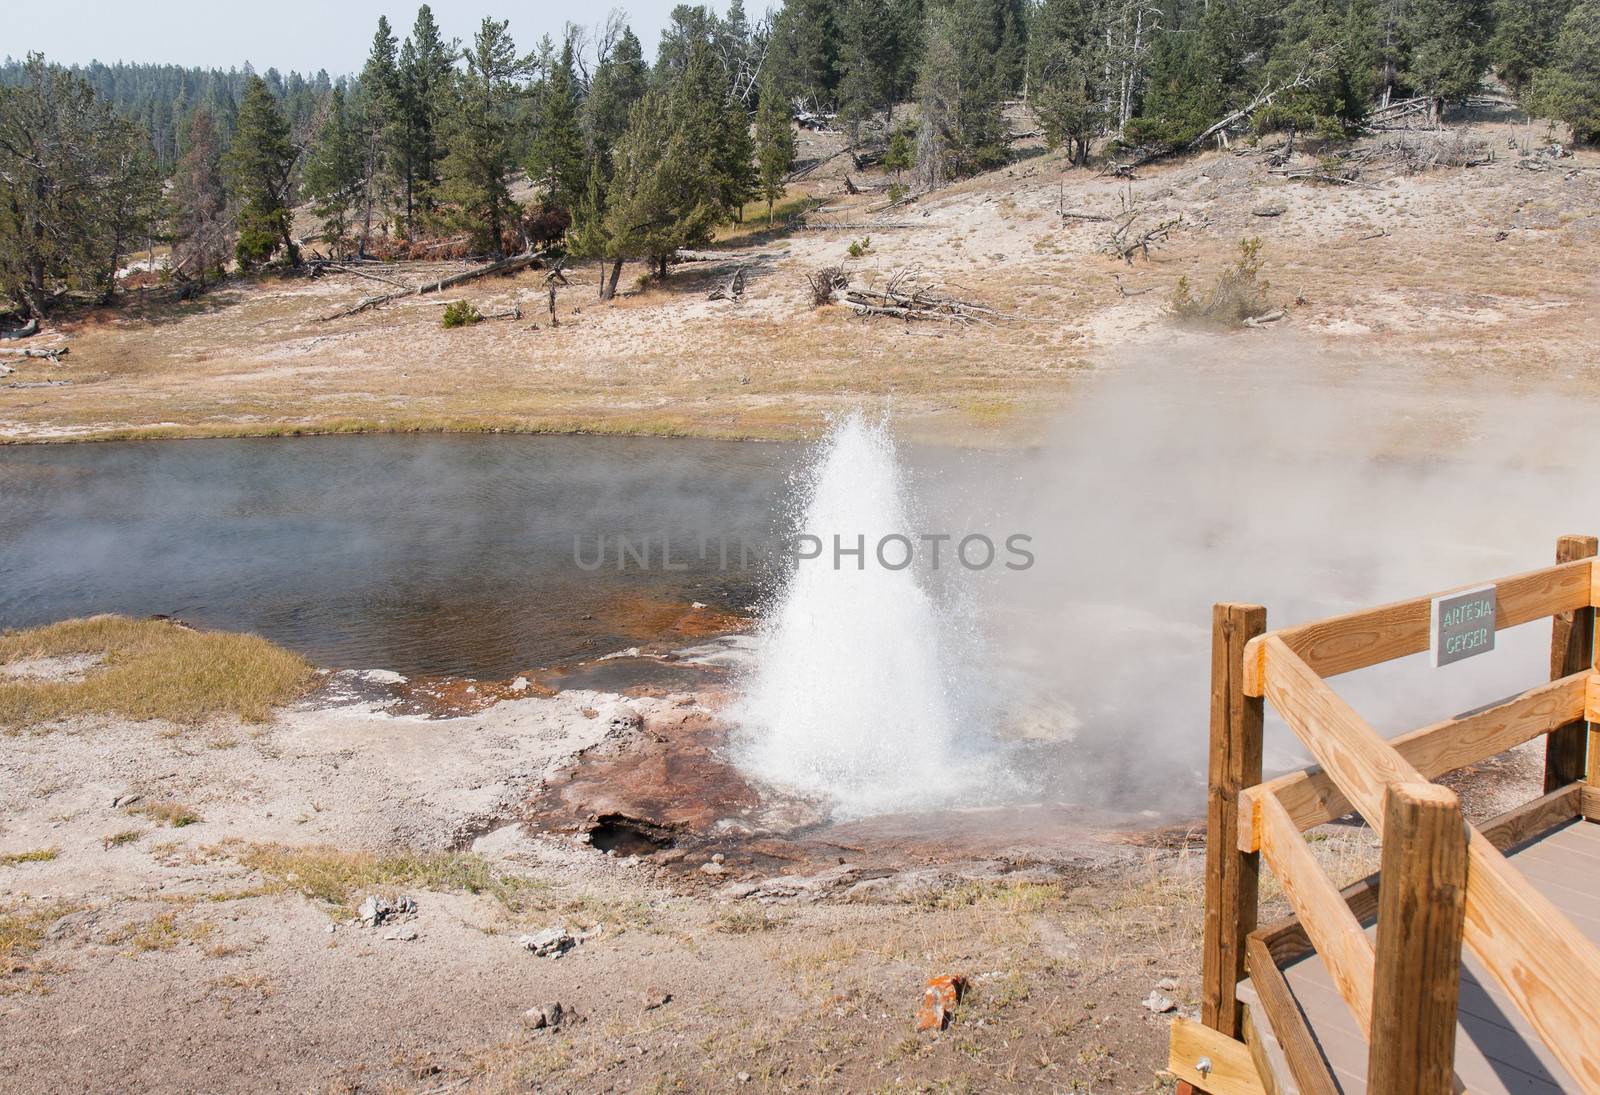 Yellowstone National Park is an otherwordly area that inspires awe in all who visit.